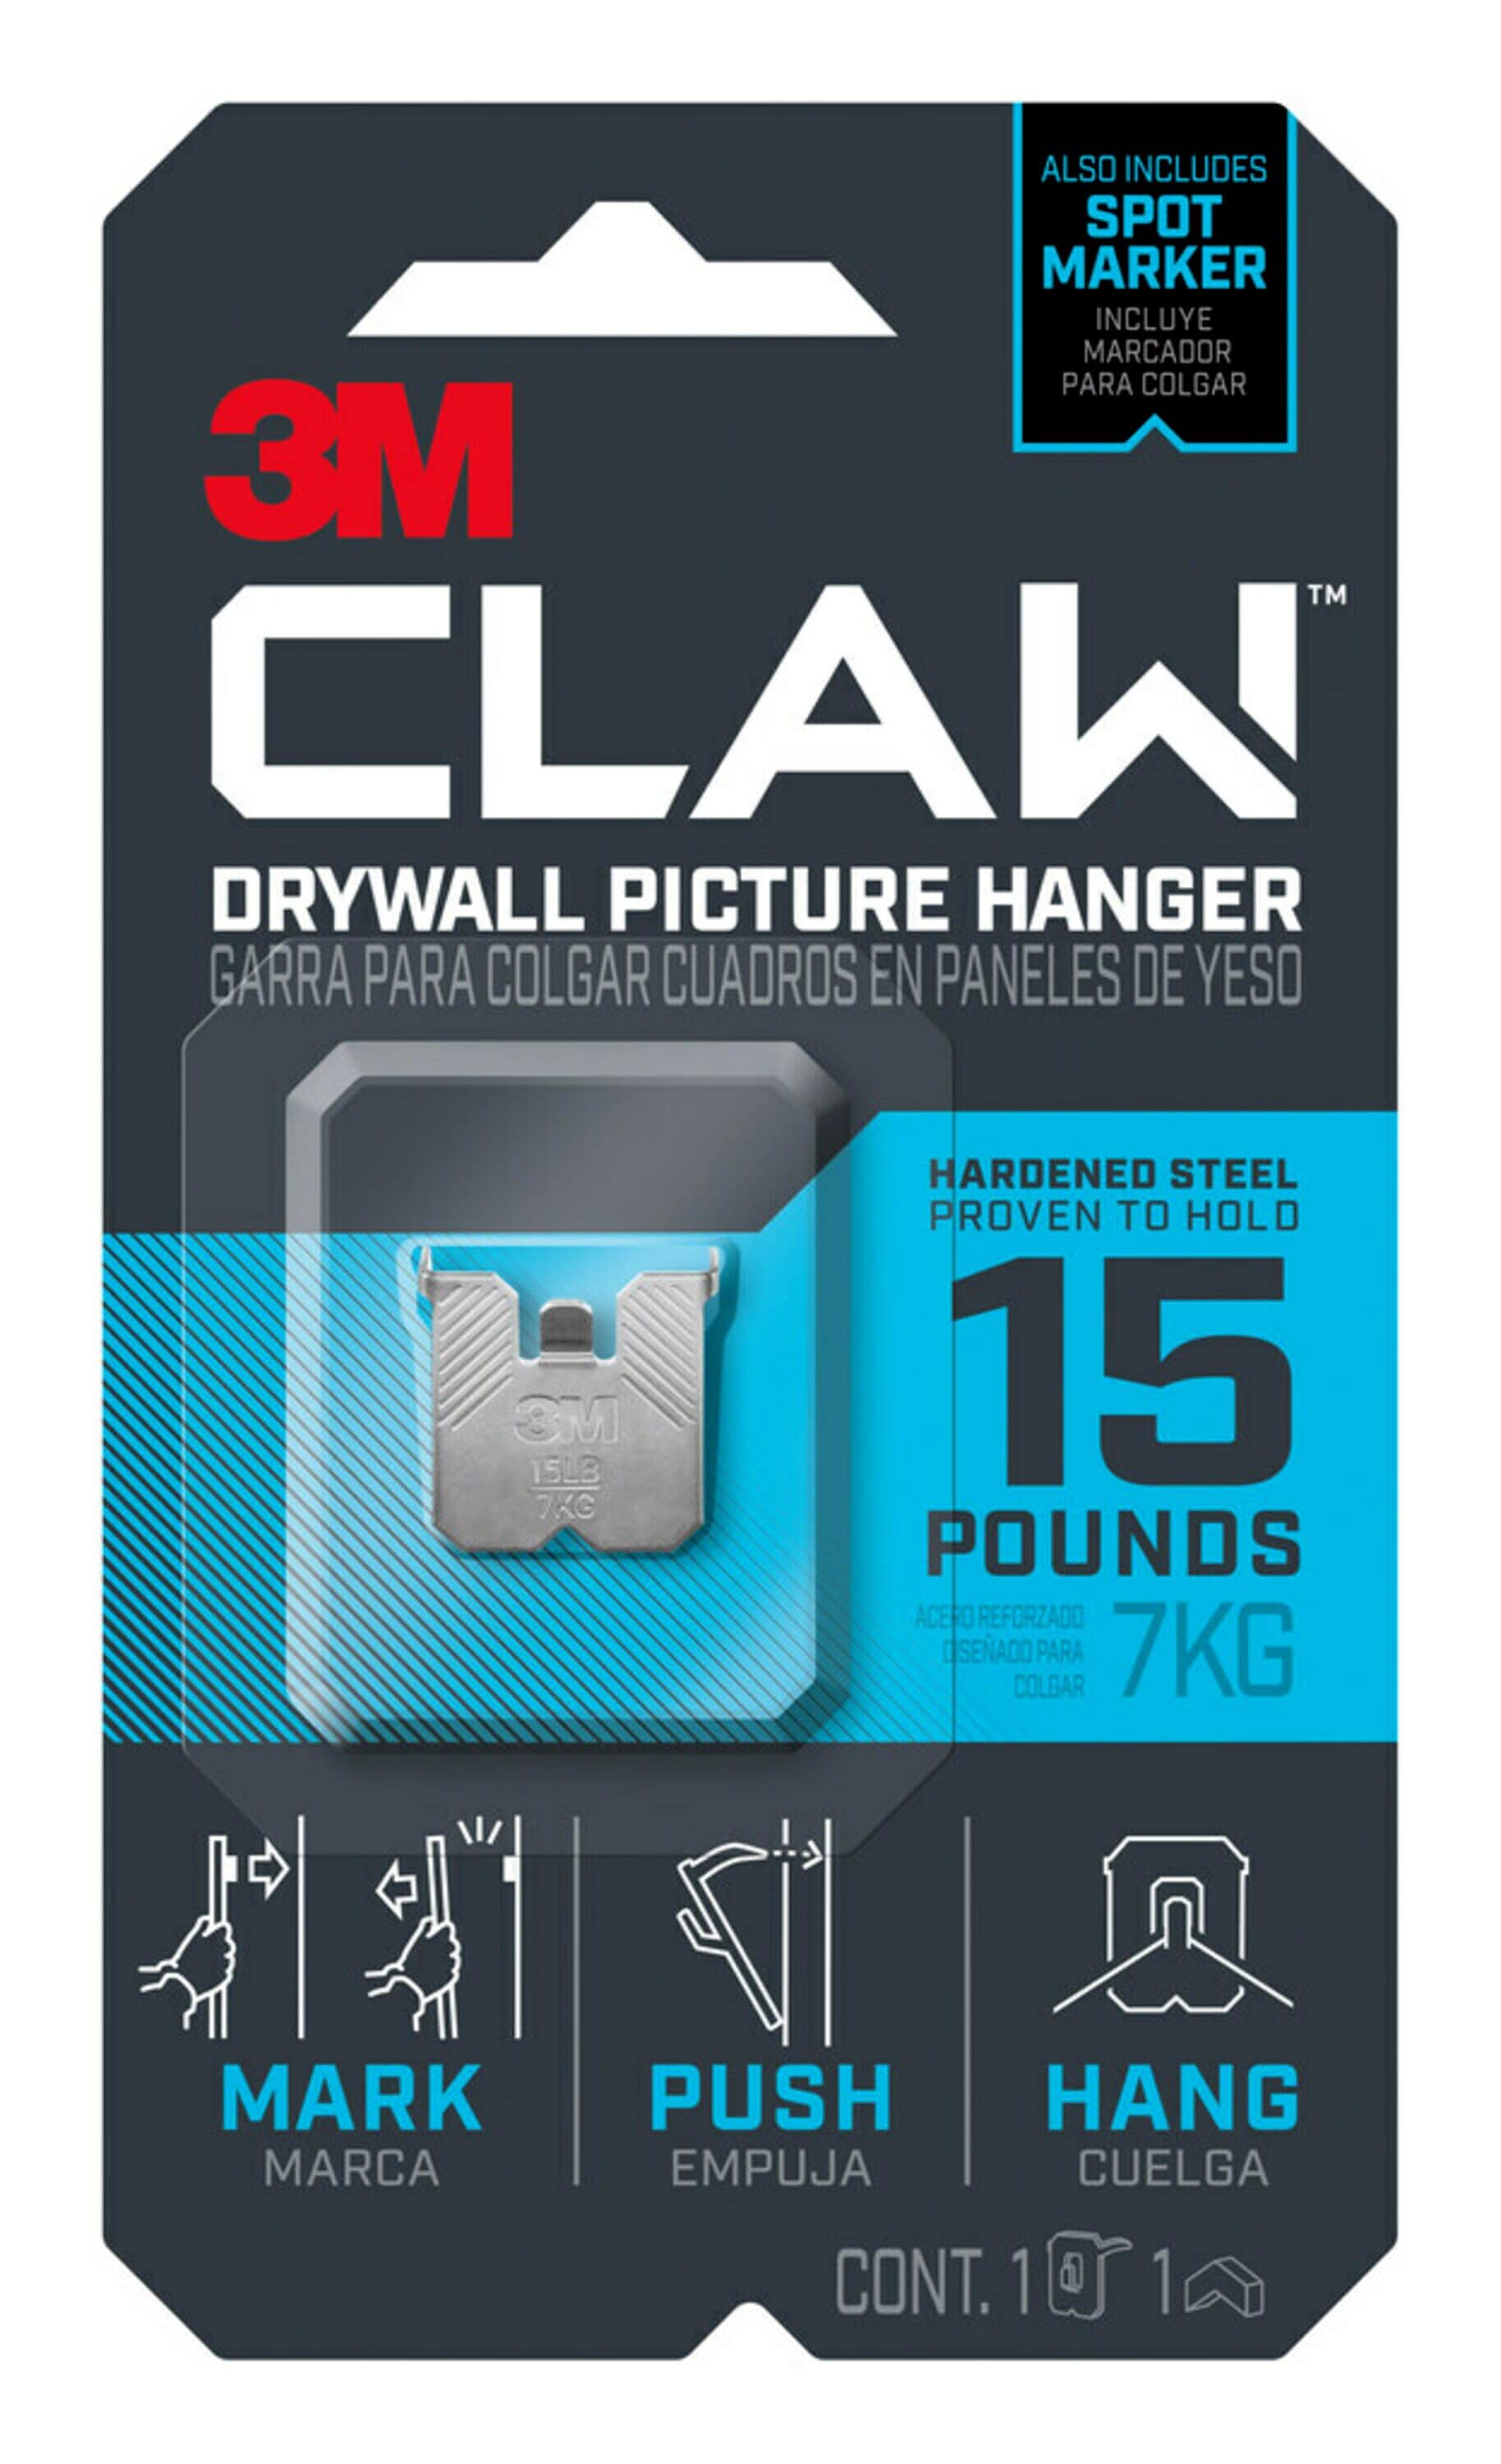 3M CLAW Drywall Picture Hanger With Temporary Spot Marker, Assorted, 8 Hangers, 8 Markers/Pack